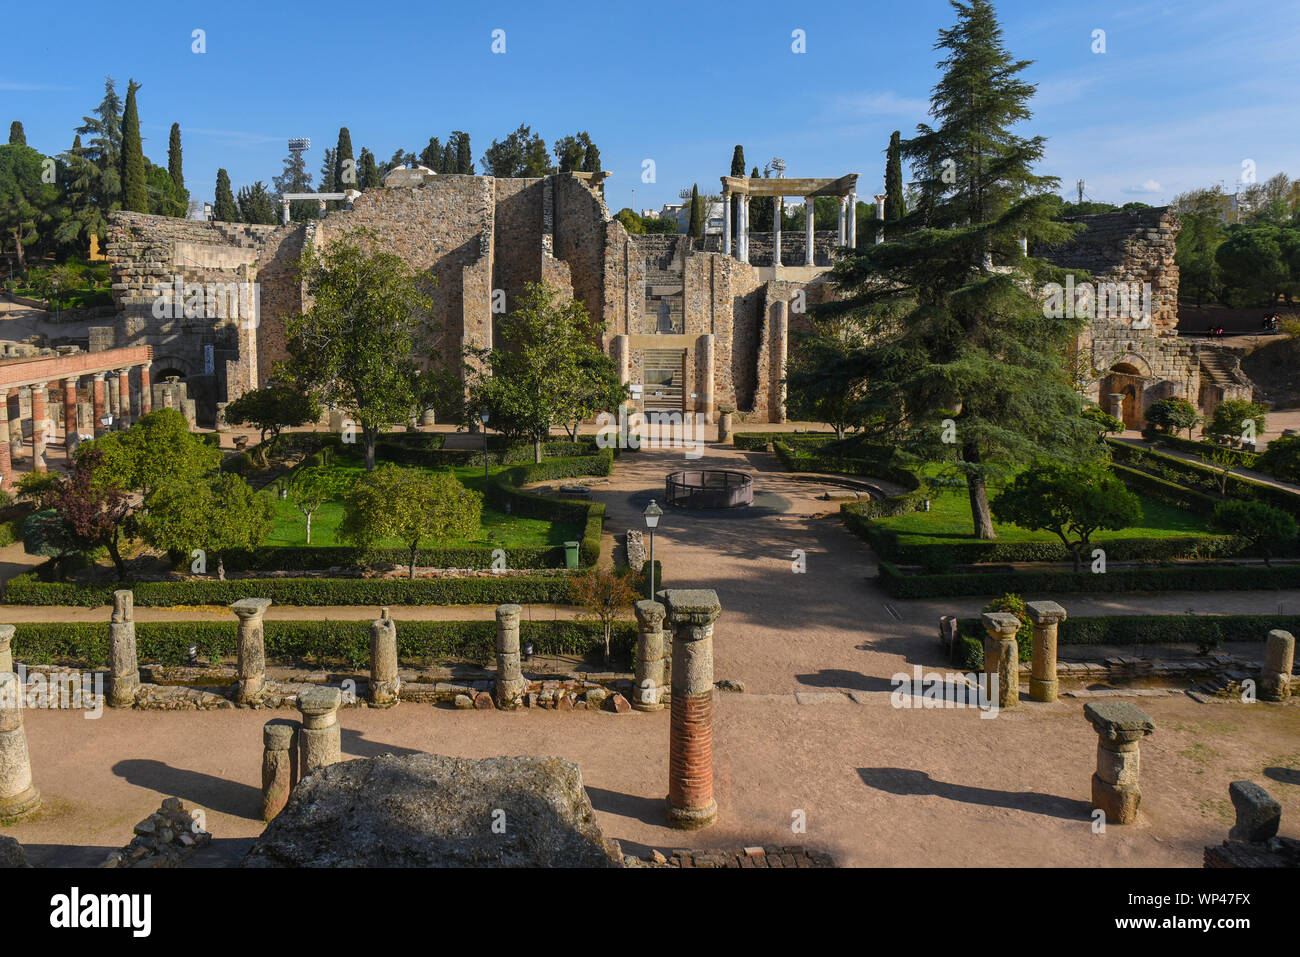 View of the Roman ruins of Merida, Spain, looking from the gardens towards the theatre.  Columns and green trees Stock Photo